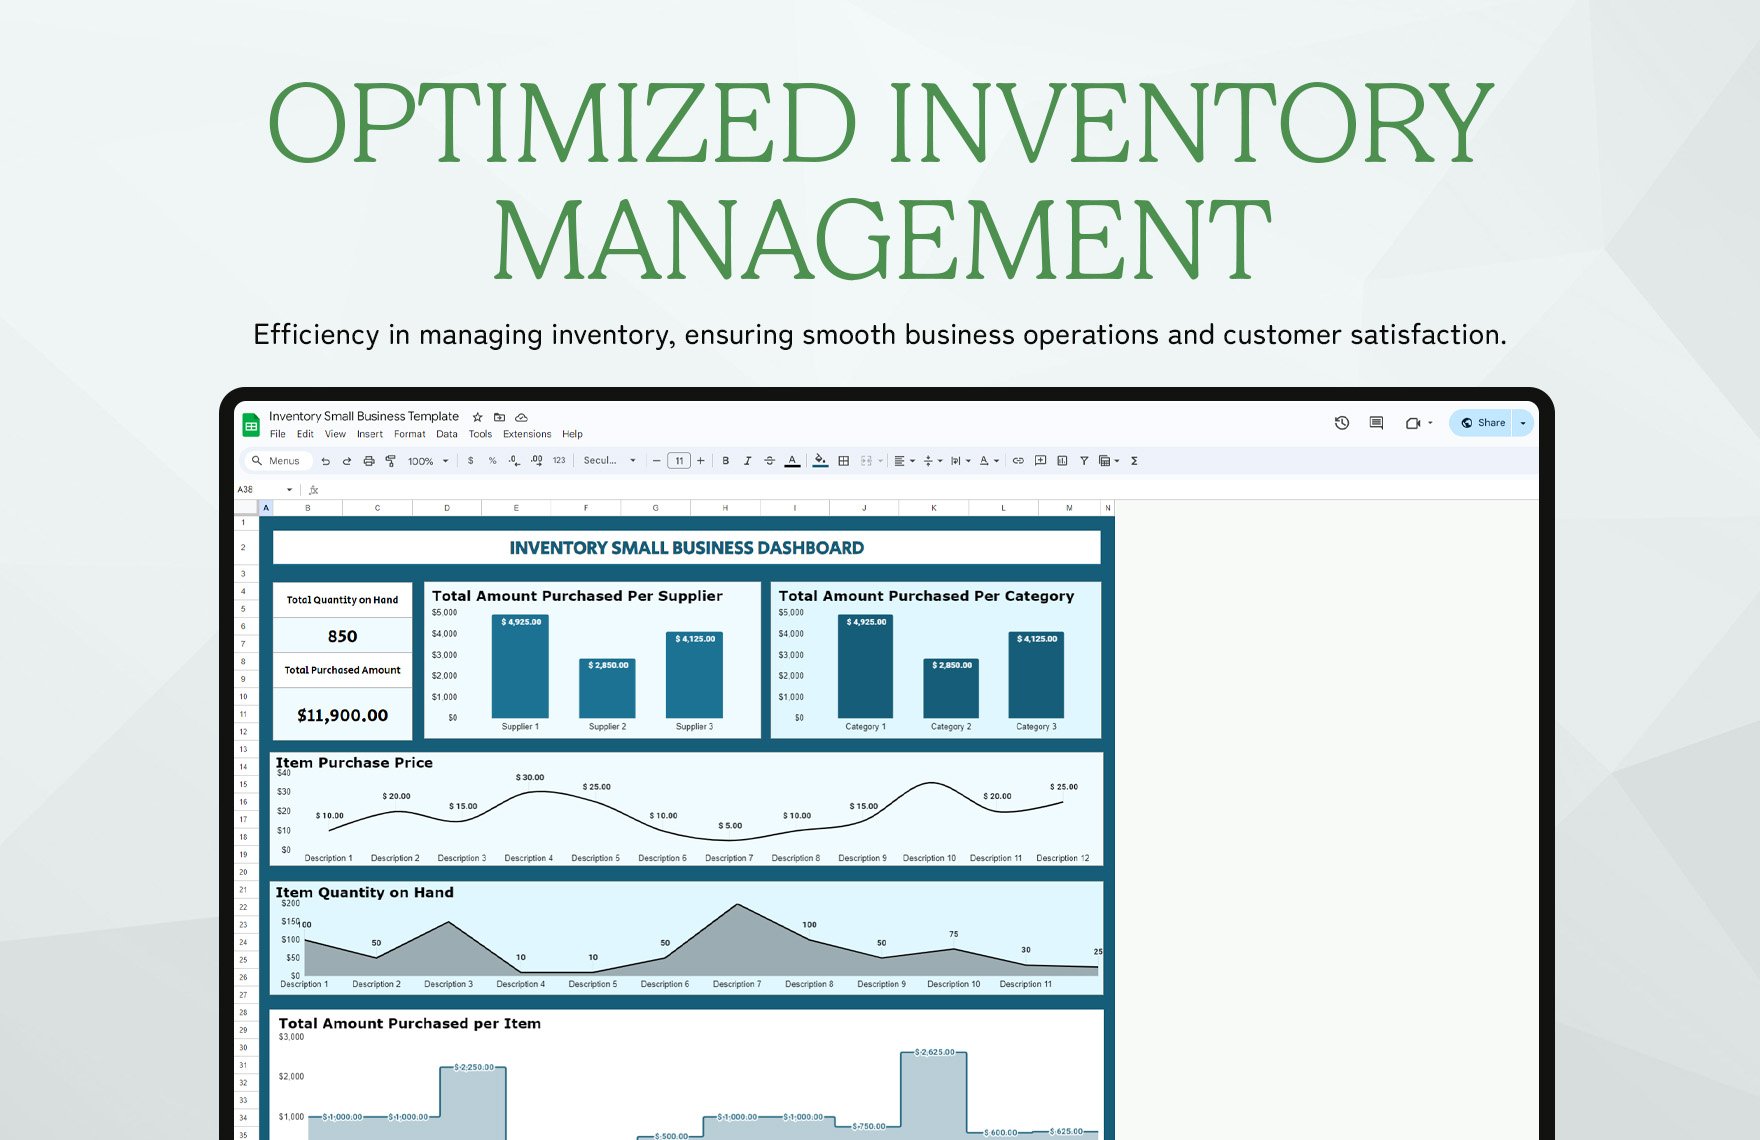 Inventory Small Business Template